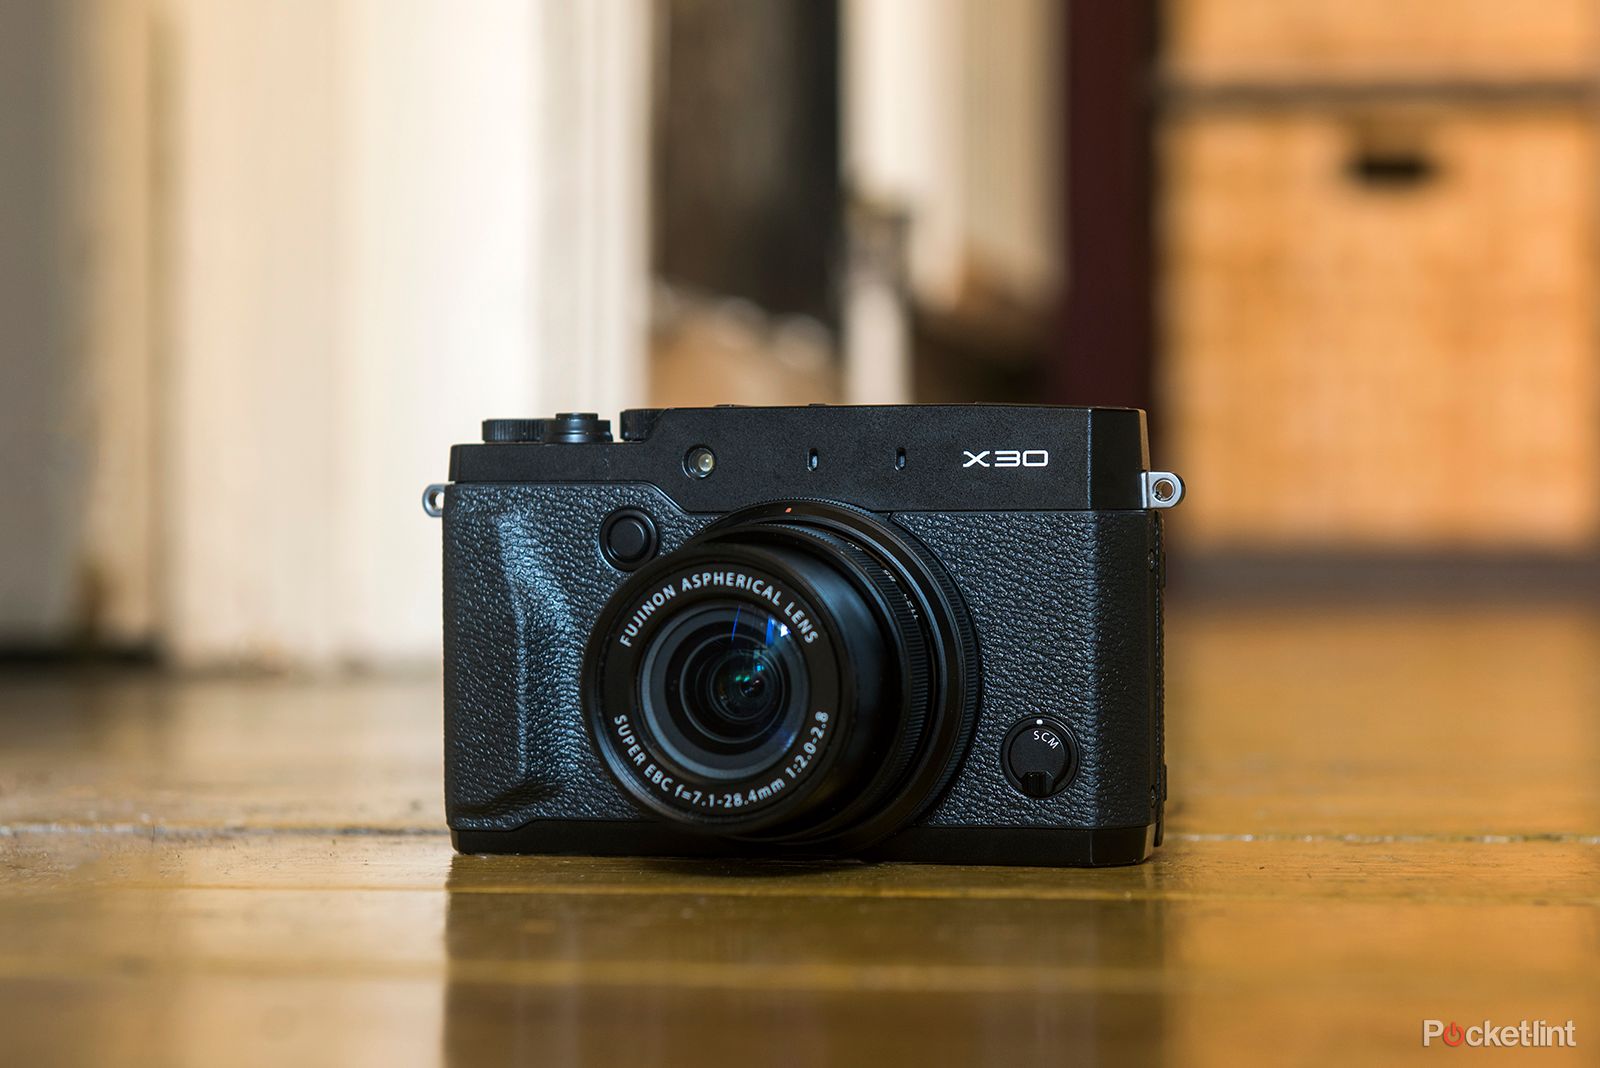 Fujifilm X30 review: Bigger and better, but beleaguered